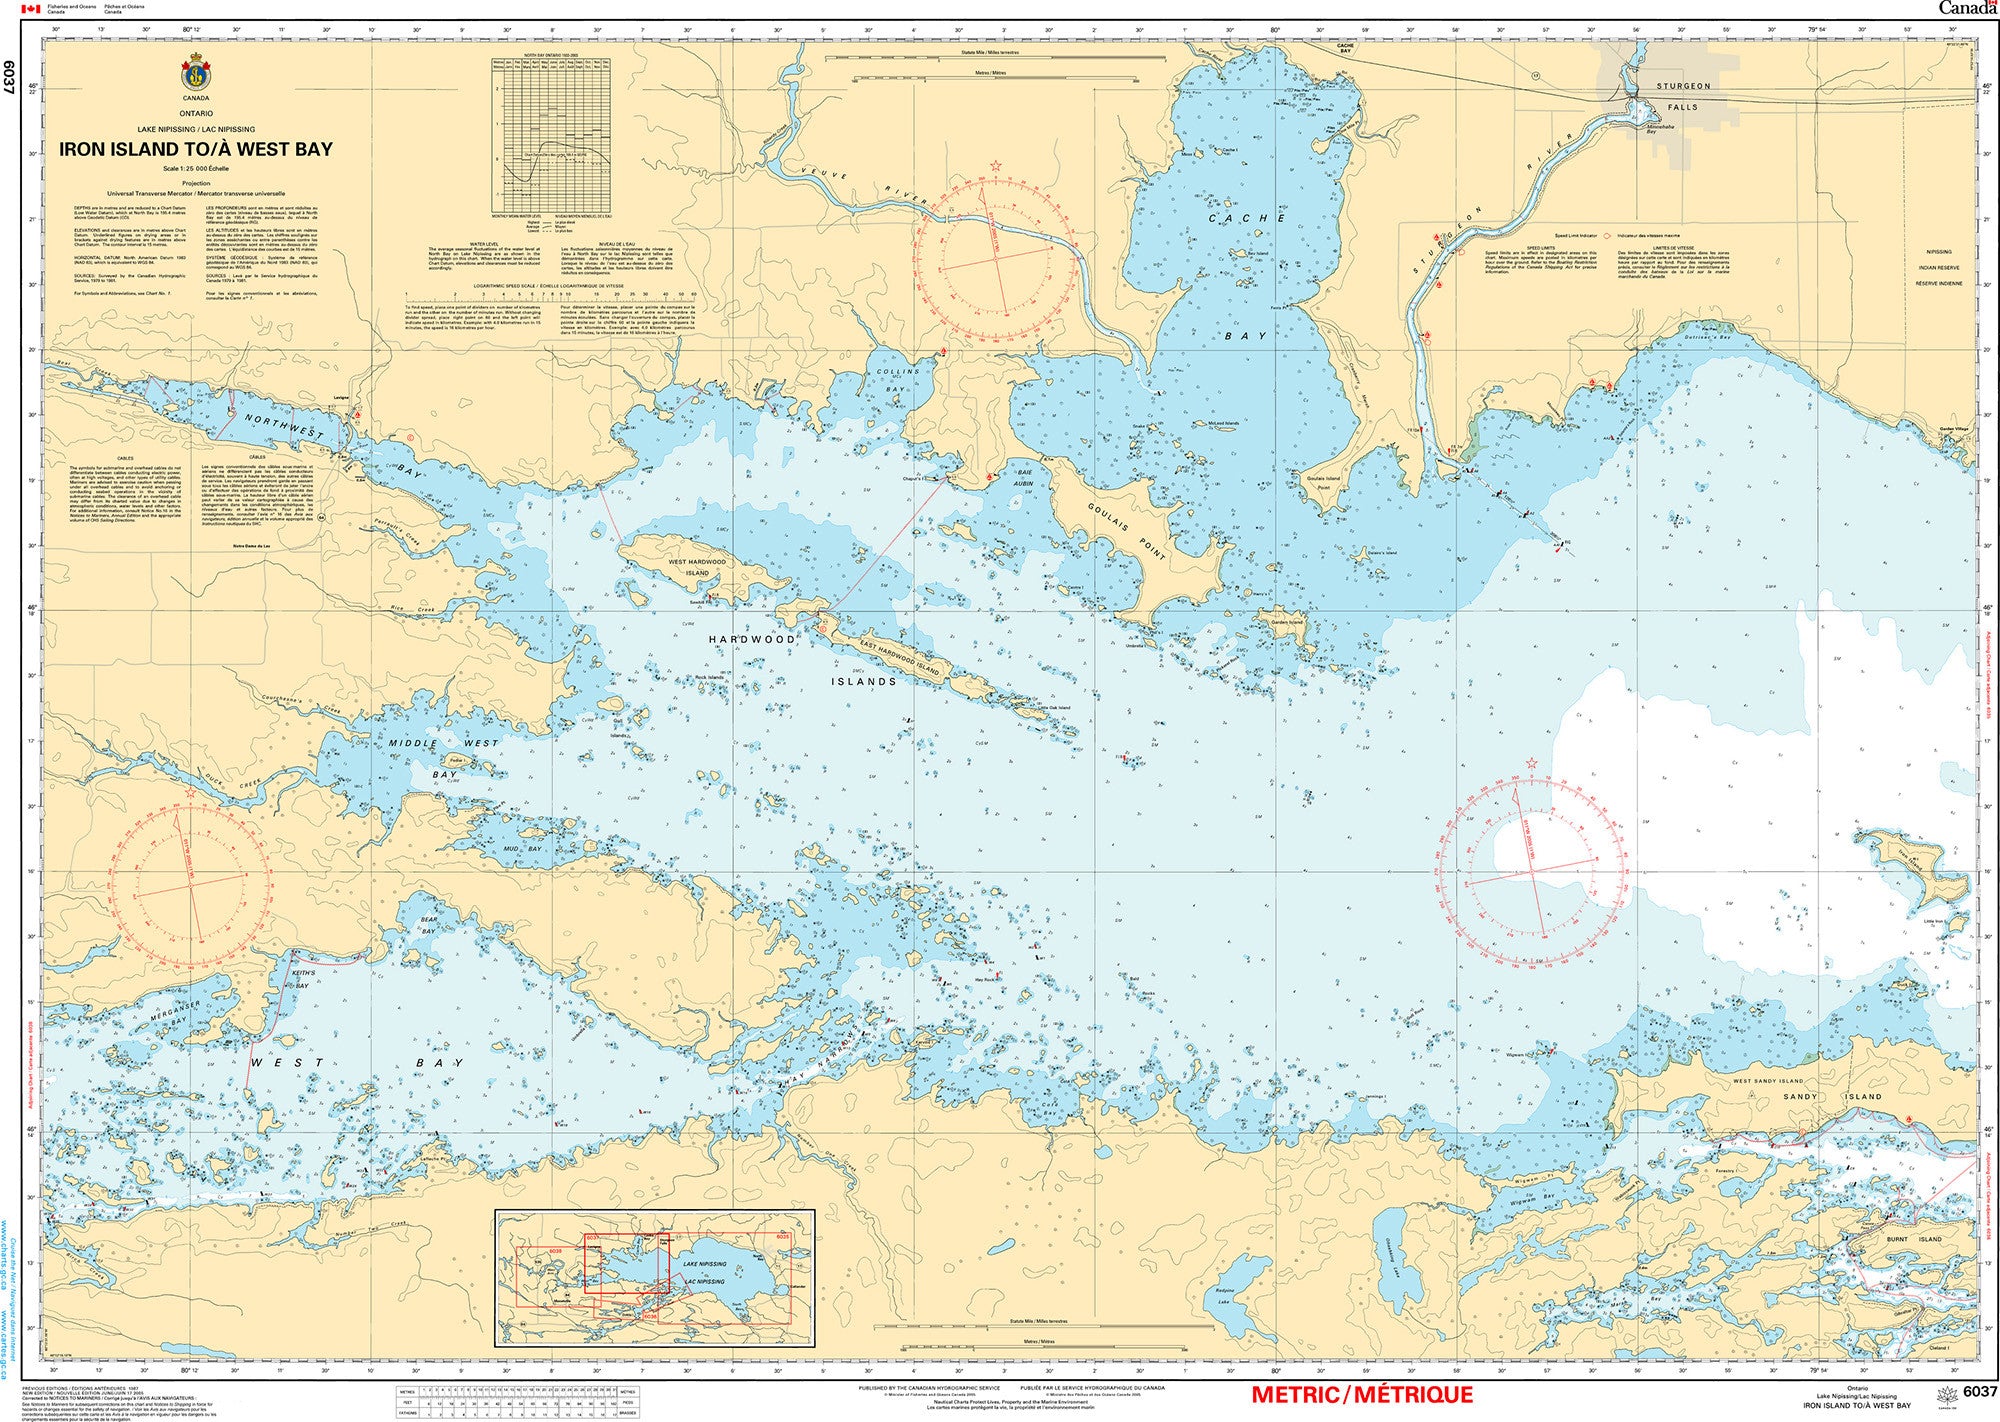 Canadian Hydrographic Service Nautical Chart CHS6037: Iron Island to/à West Bay